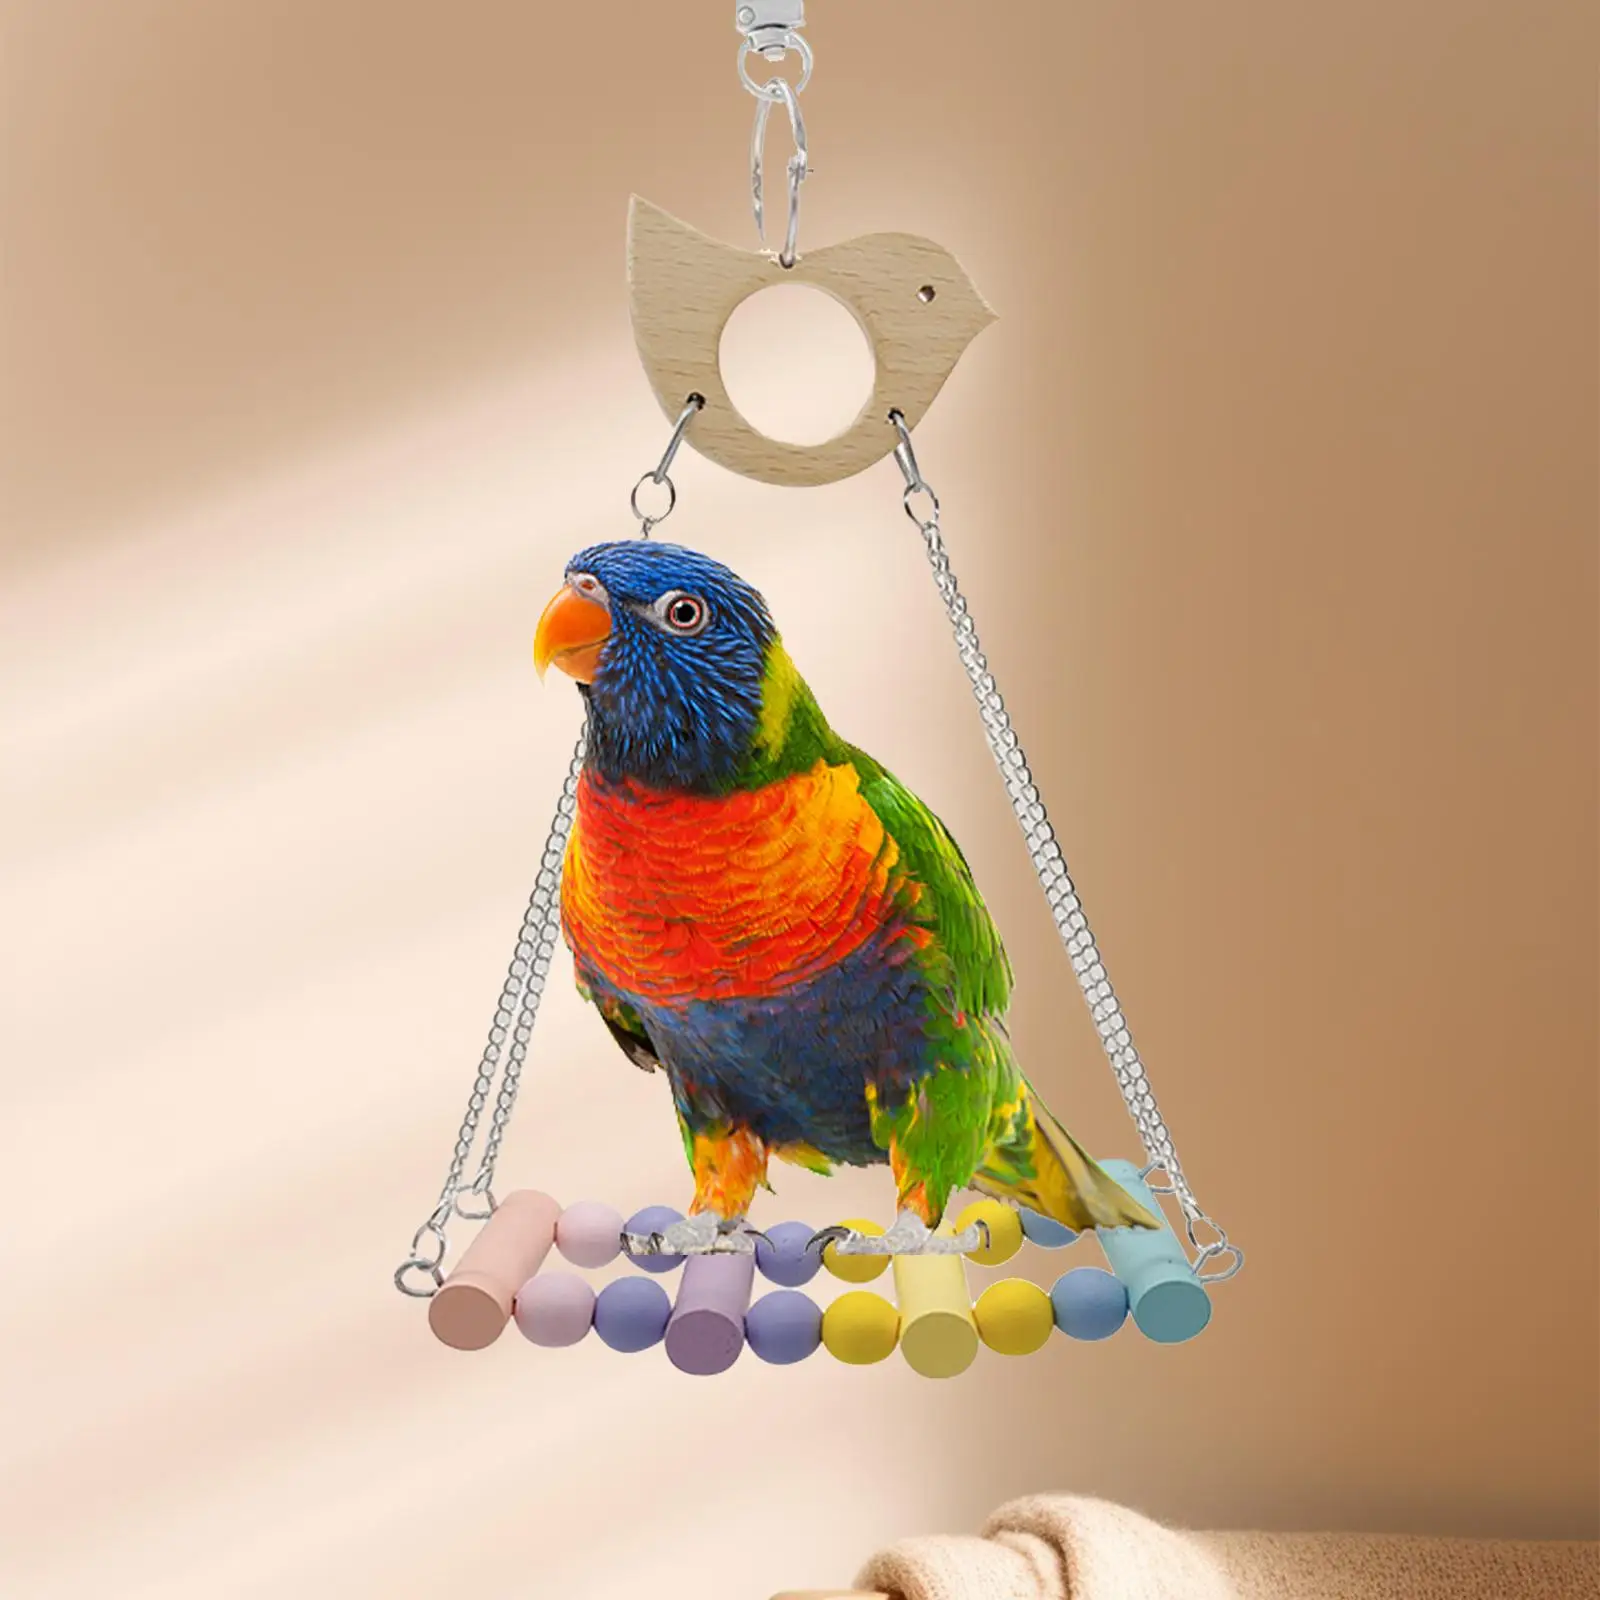 Bird Swing Toys Climbing Indoor Outdoor Bird Stands Parrot Perch Toy Wooden Parrots Stand for Medium Small Large Parrot Finches